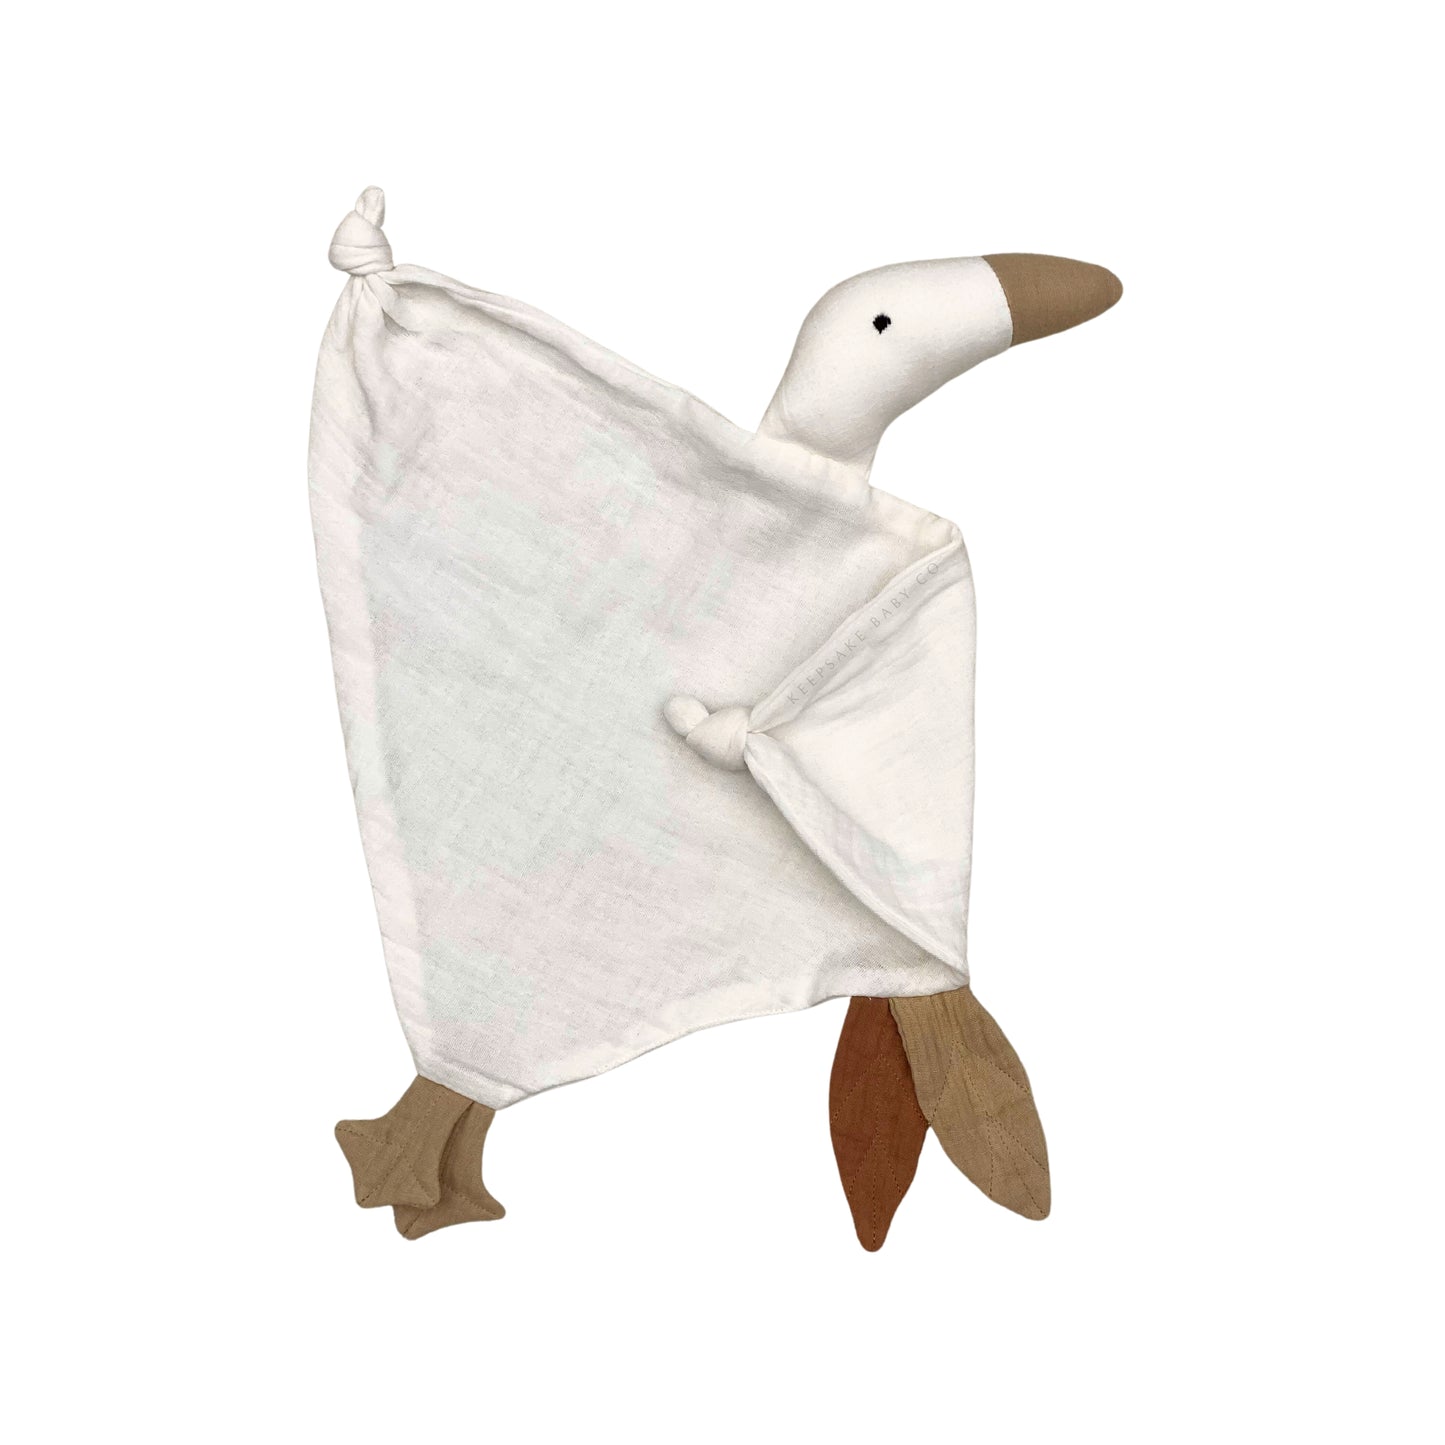 The sweetest baby or newborn gift. The cuddle goose is a 100% Organic Muslin Cotton comforter. This cute and buttery soft goose is perfect for snuggling, playtime and sleeping.